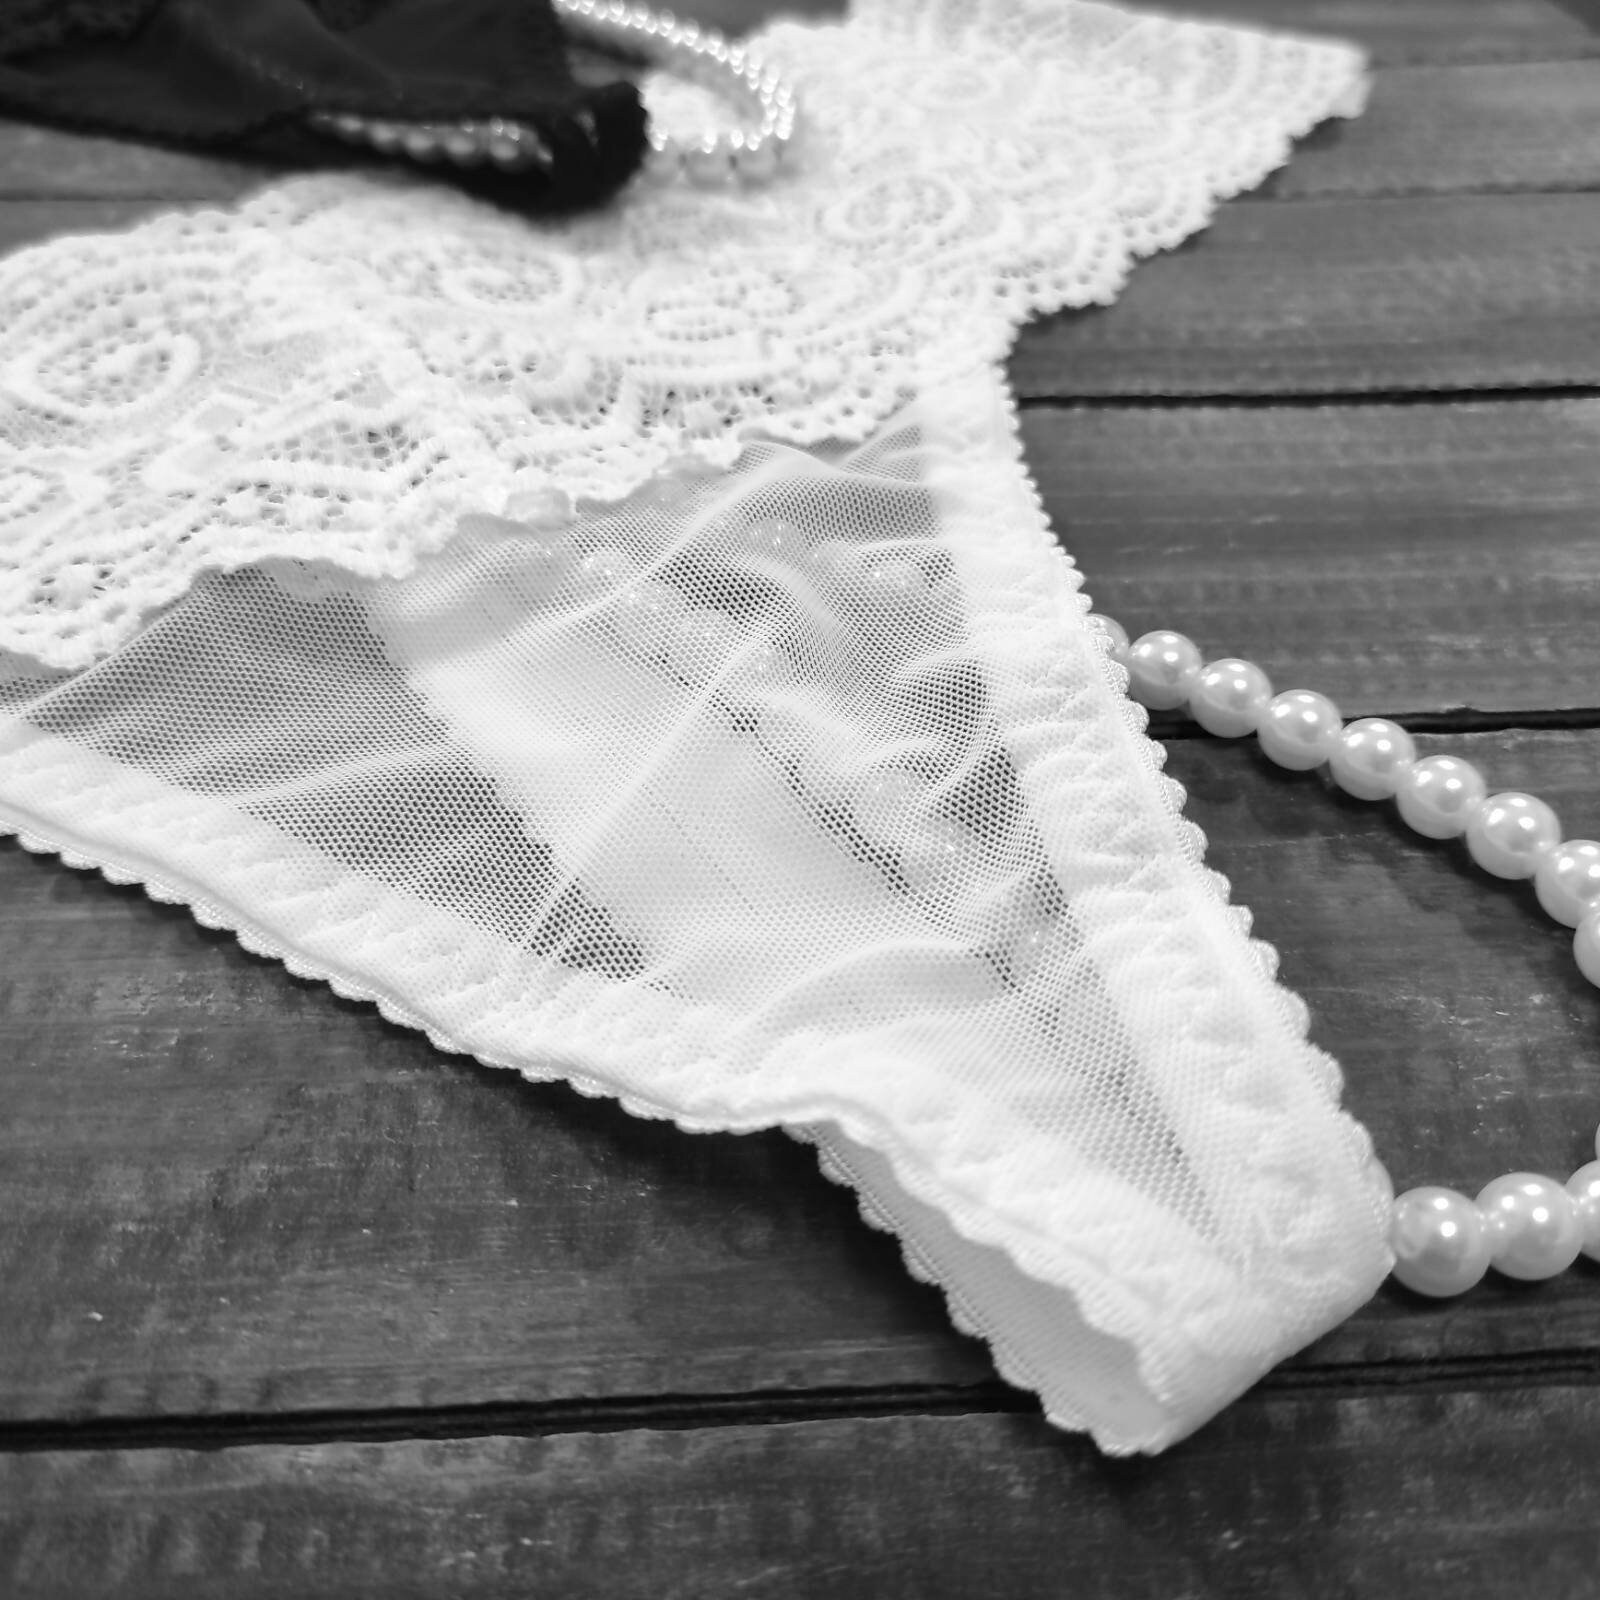 Secret Pearls Crotchless Panties Plus Size G String Lingerie Underwear See Through Thong Panty